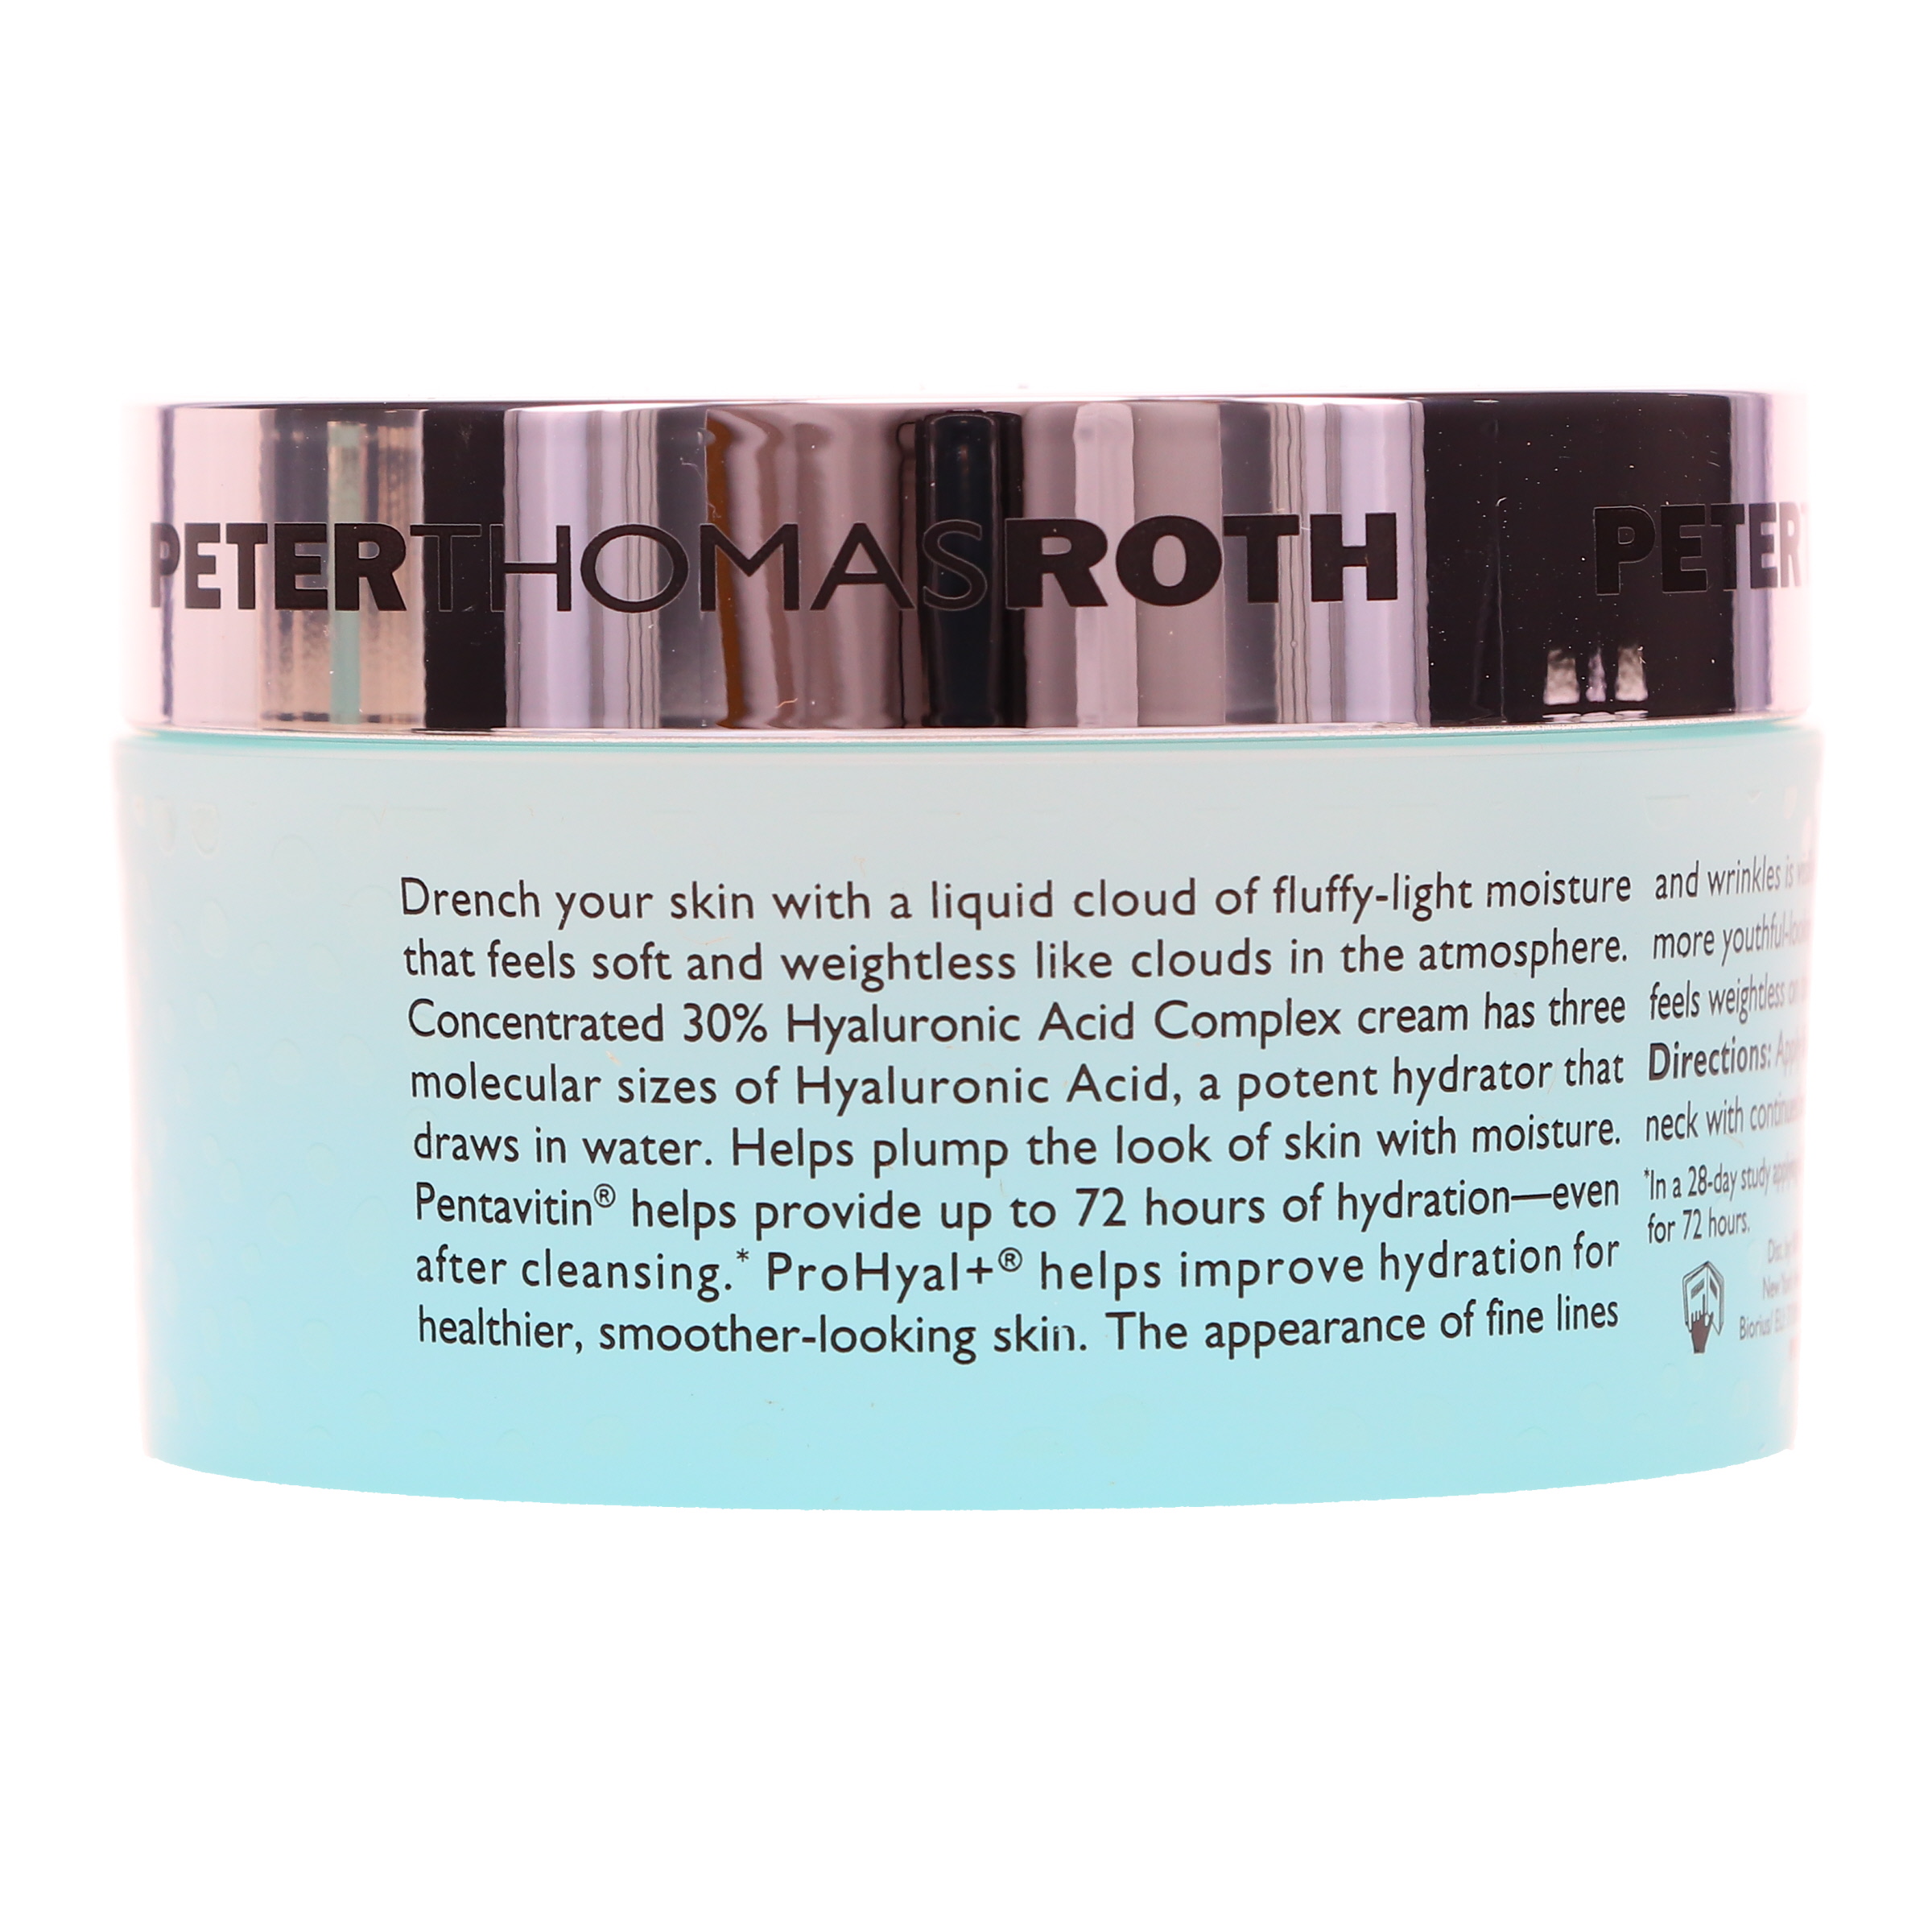 Peter Thomas Roth Water Drench Hyaluronic Cloud Cream 1.7 Hydrating Moisturizer for Unisex - image 3 of 8